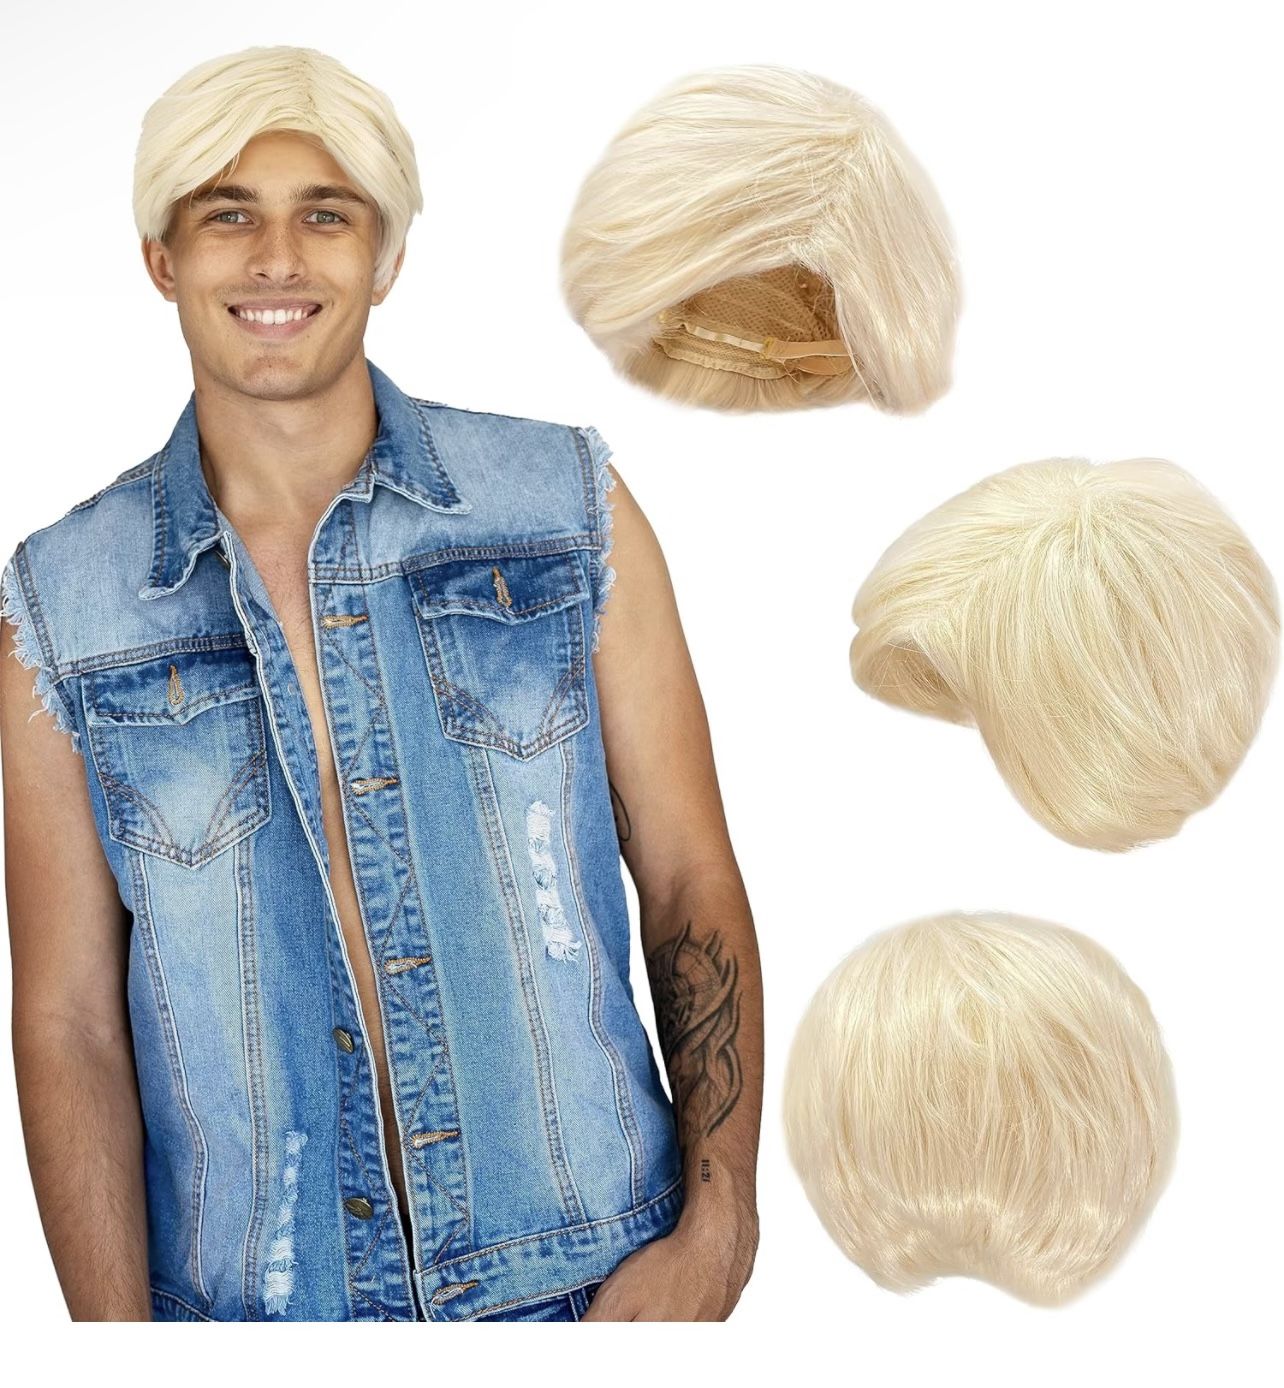 BRAND NEW IN BAG  Blonde Beach Dude Wig - Short Synthetic Layered Bleach Blond Doll Costume Hair for Men with Adjustable Wig Cap 